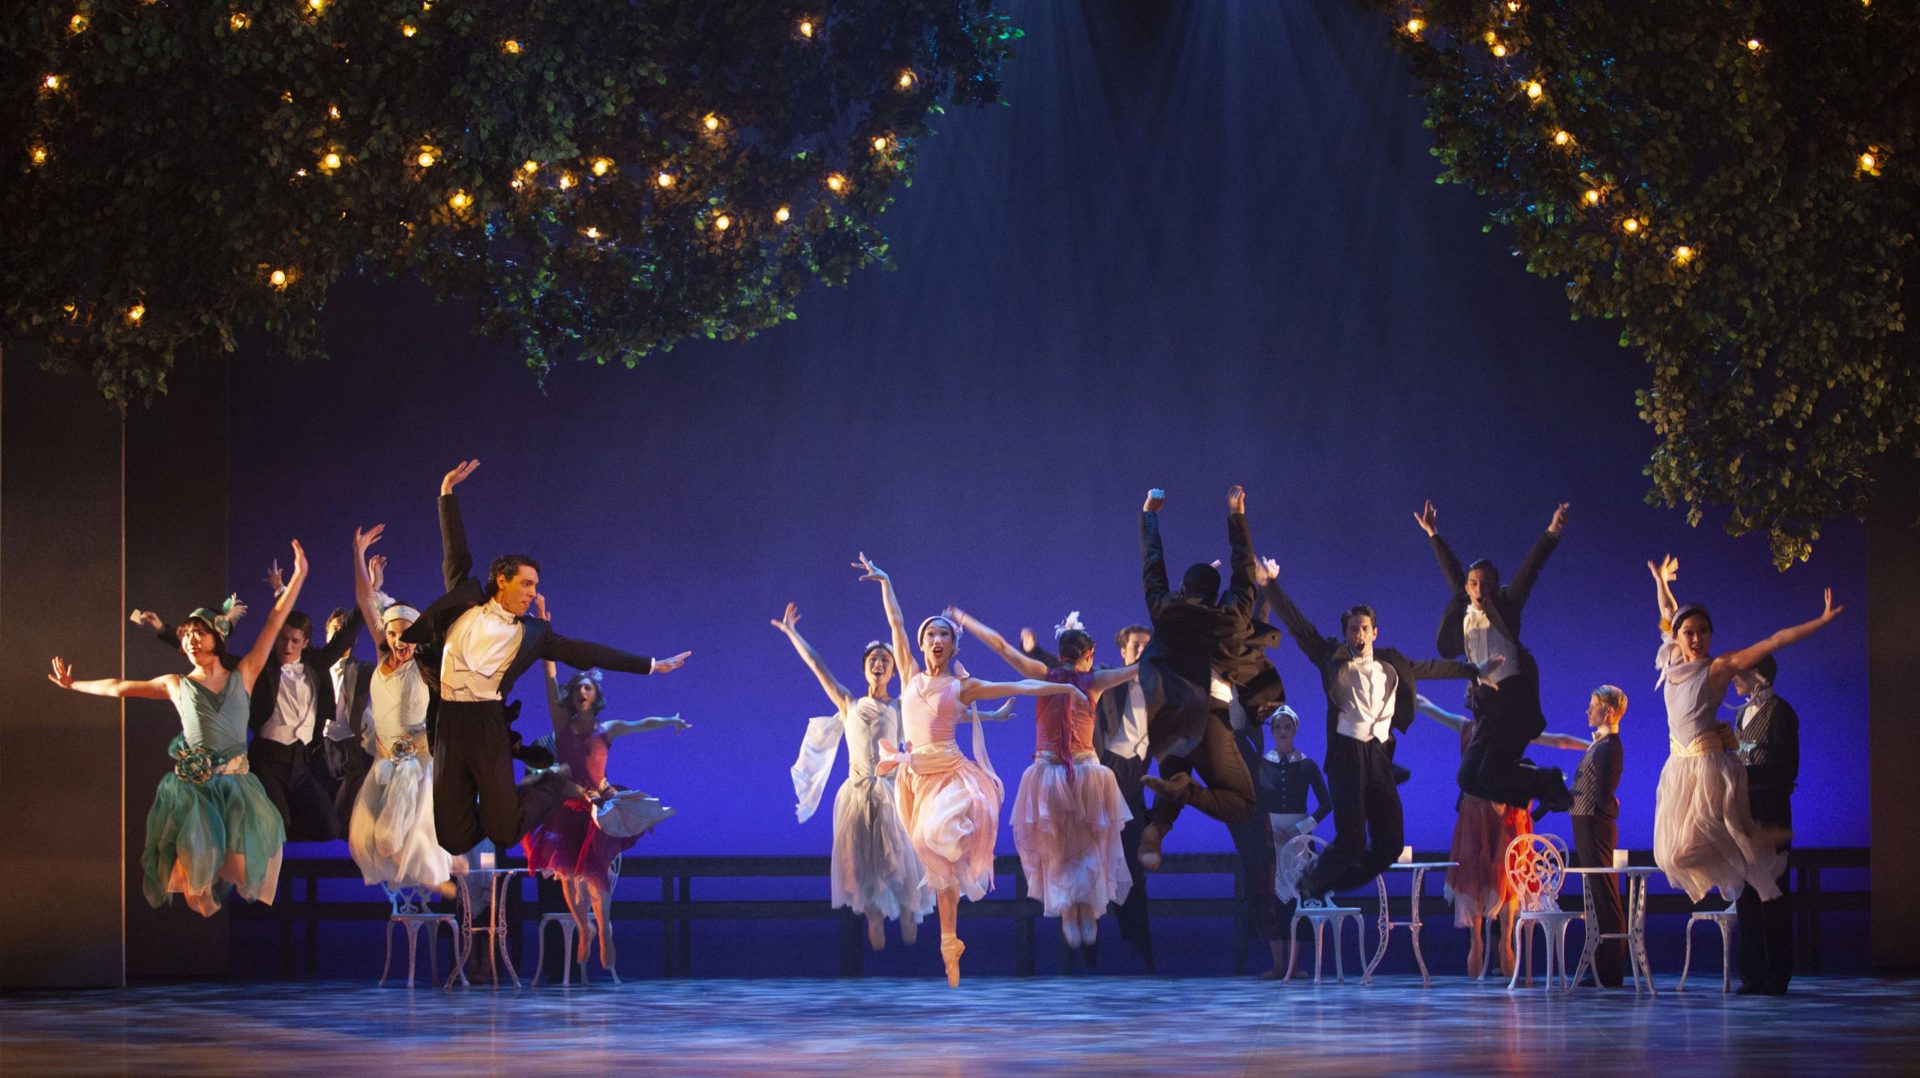 Northern Ballet Dancers on stage jumping In The Great Gatsby